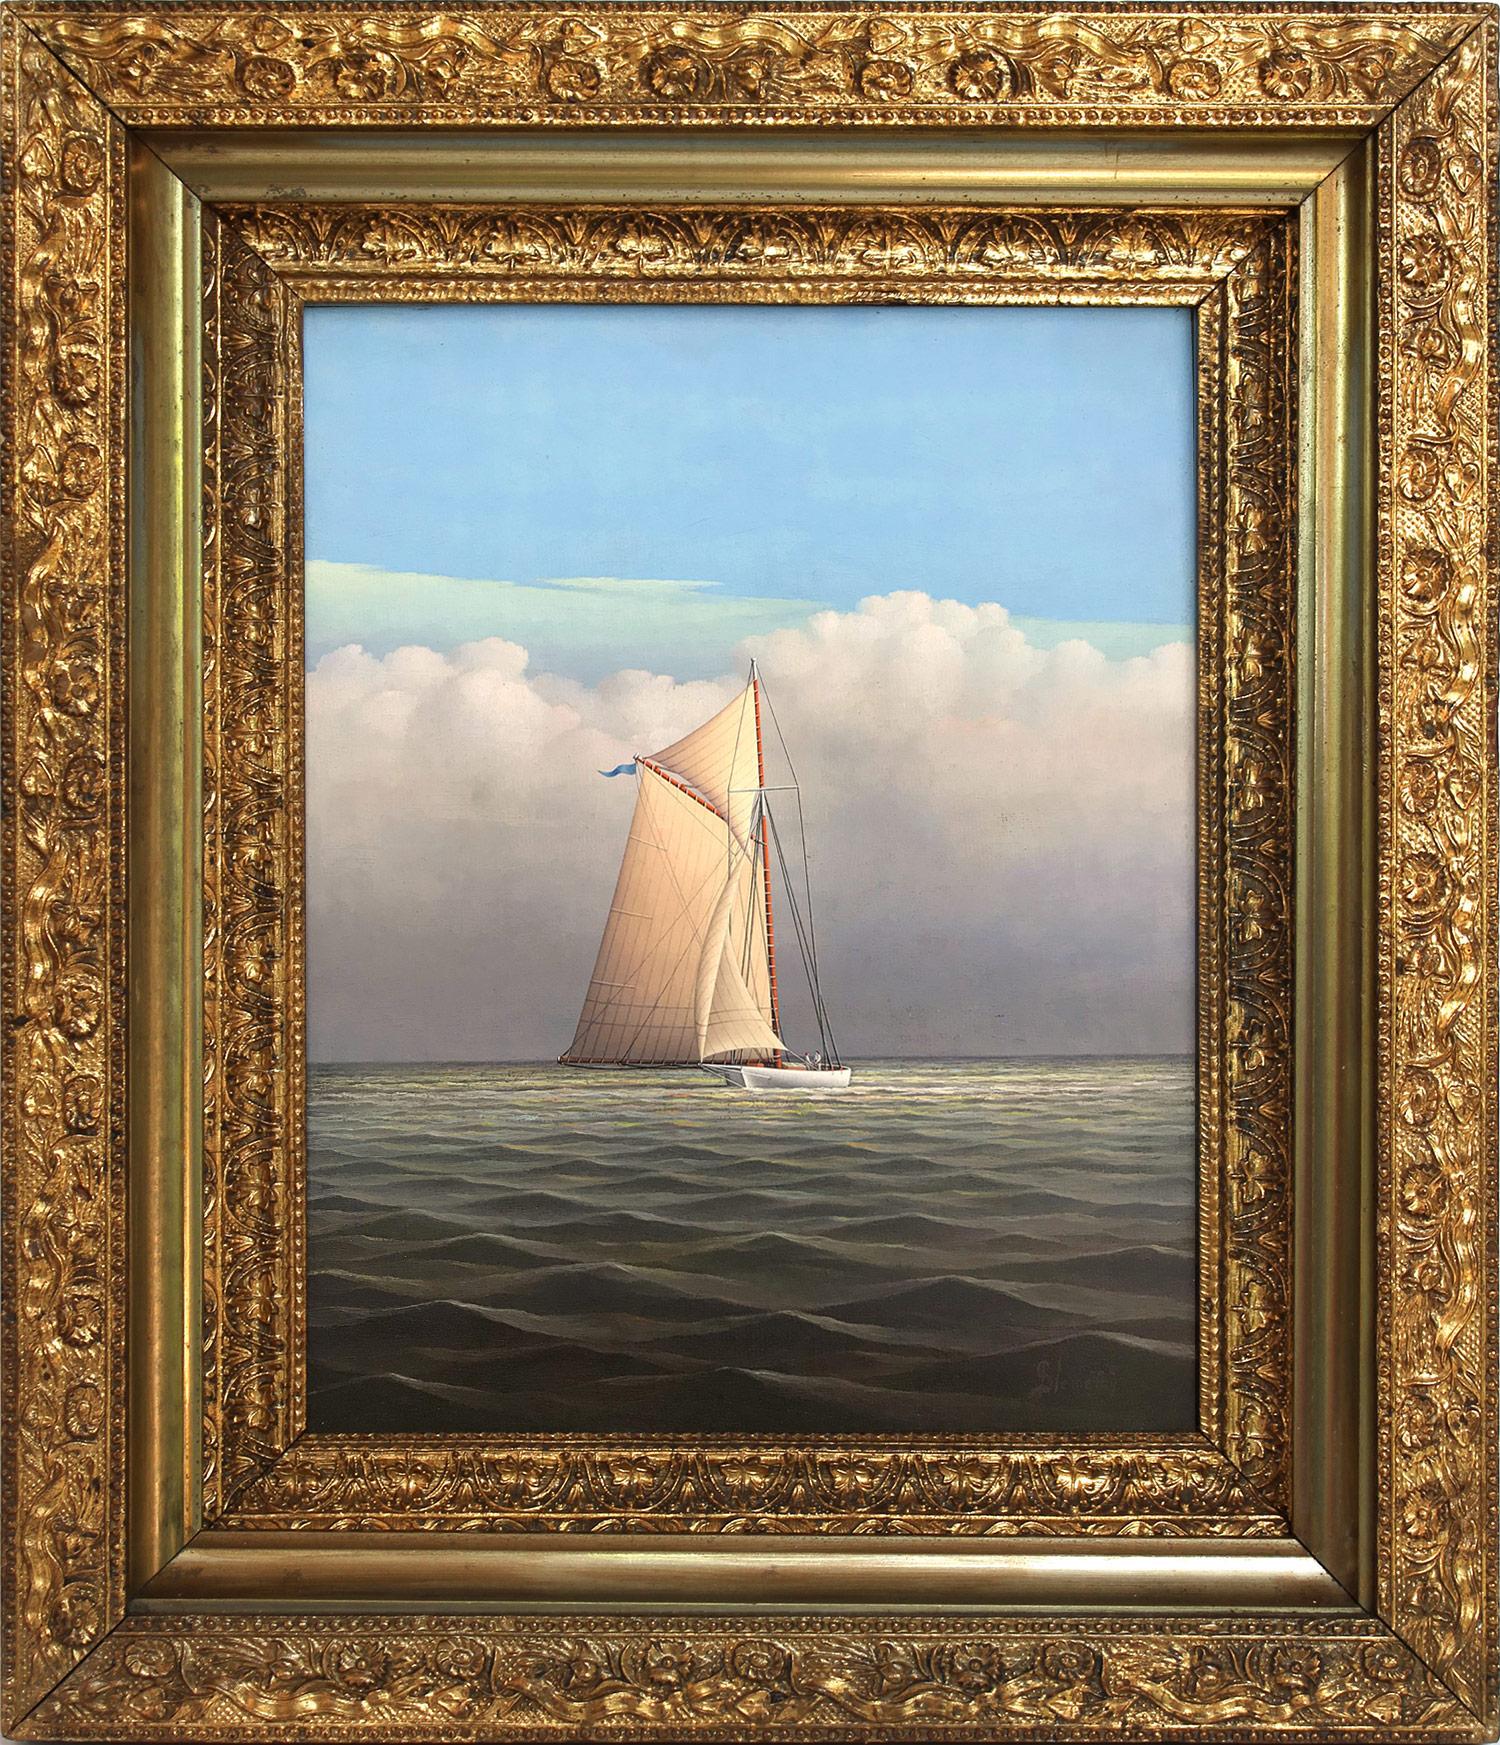 George Nemethy Landscape Painting - "Sailing After the Storm" Realist Oil Painting on Board of Sailboat in Open Sea